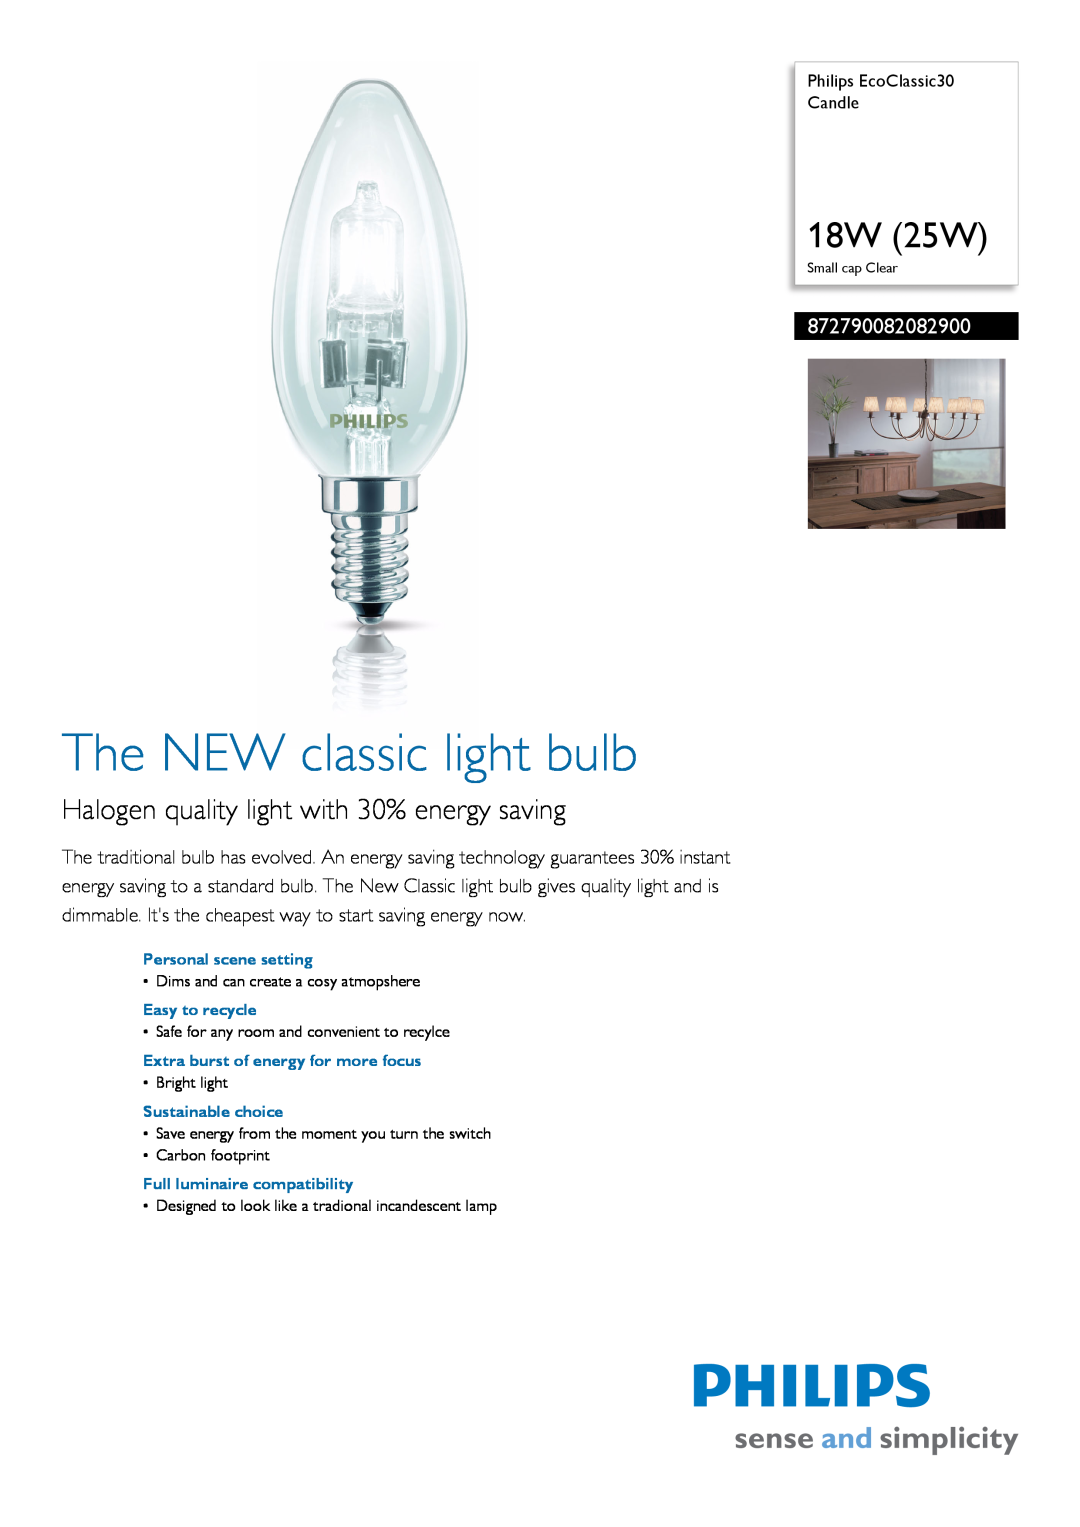 Philips 8.73E+14 manual 872790082082900, The NEW classic light bulb, 18W 25W, Halogen quality light with 30% energy saving 